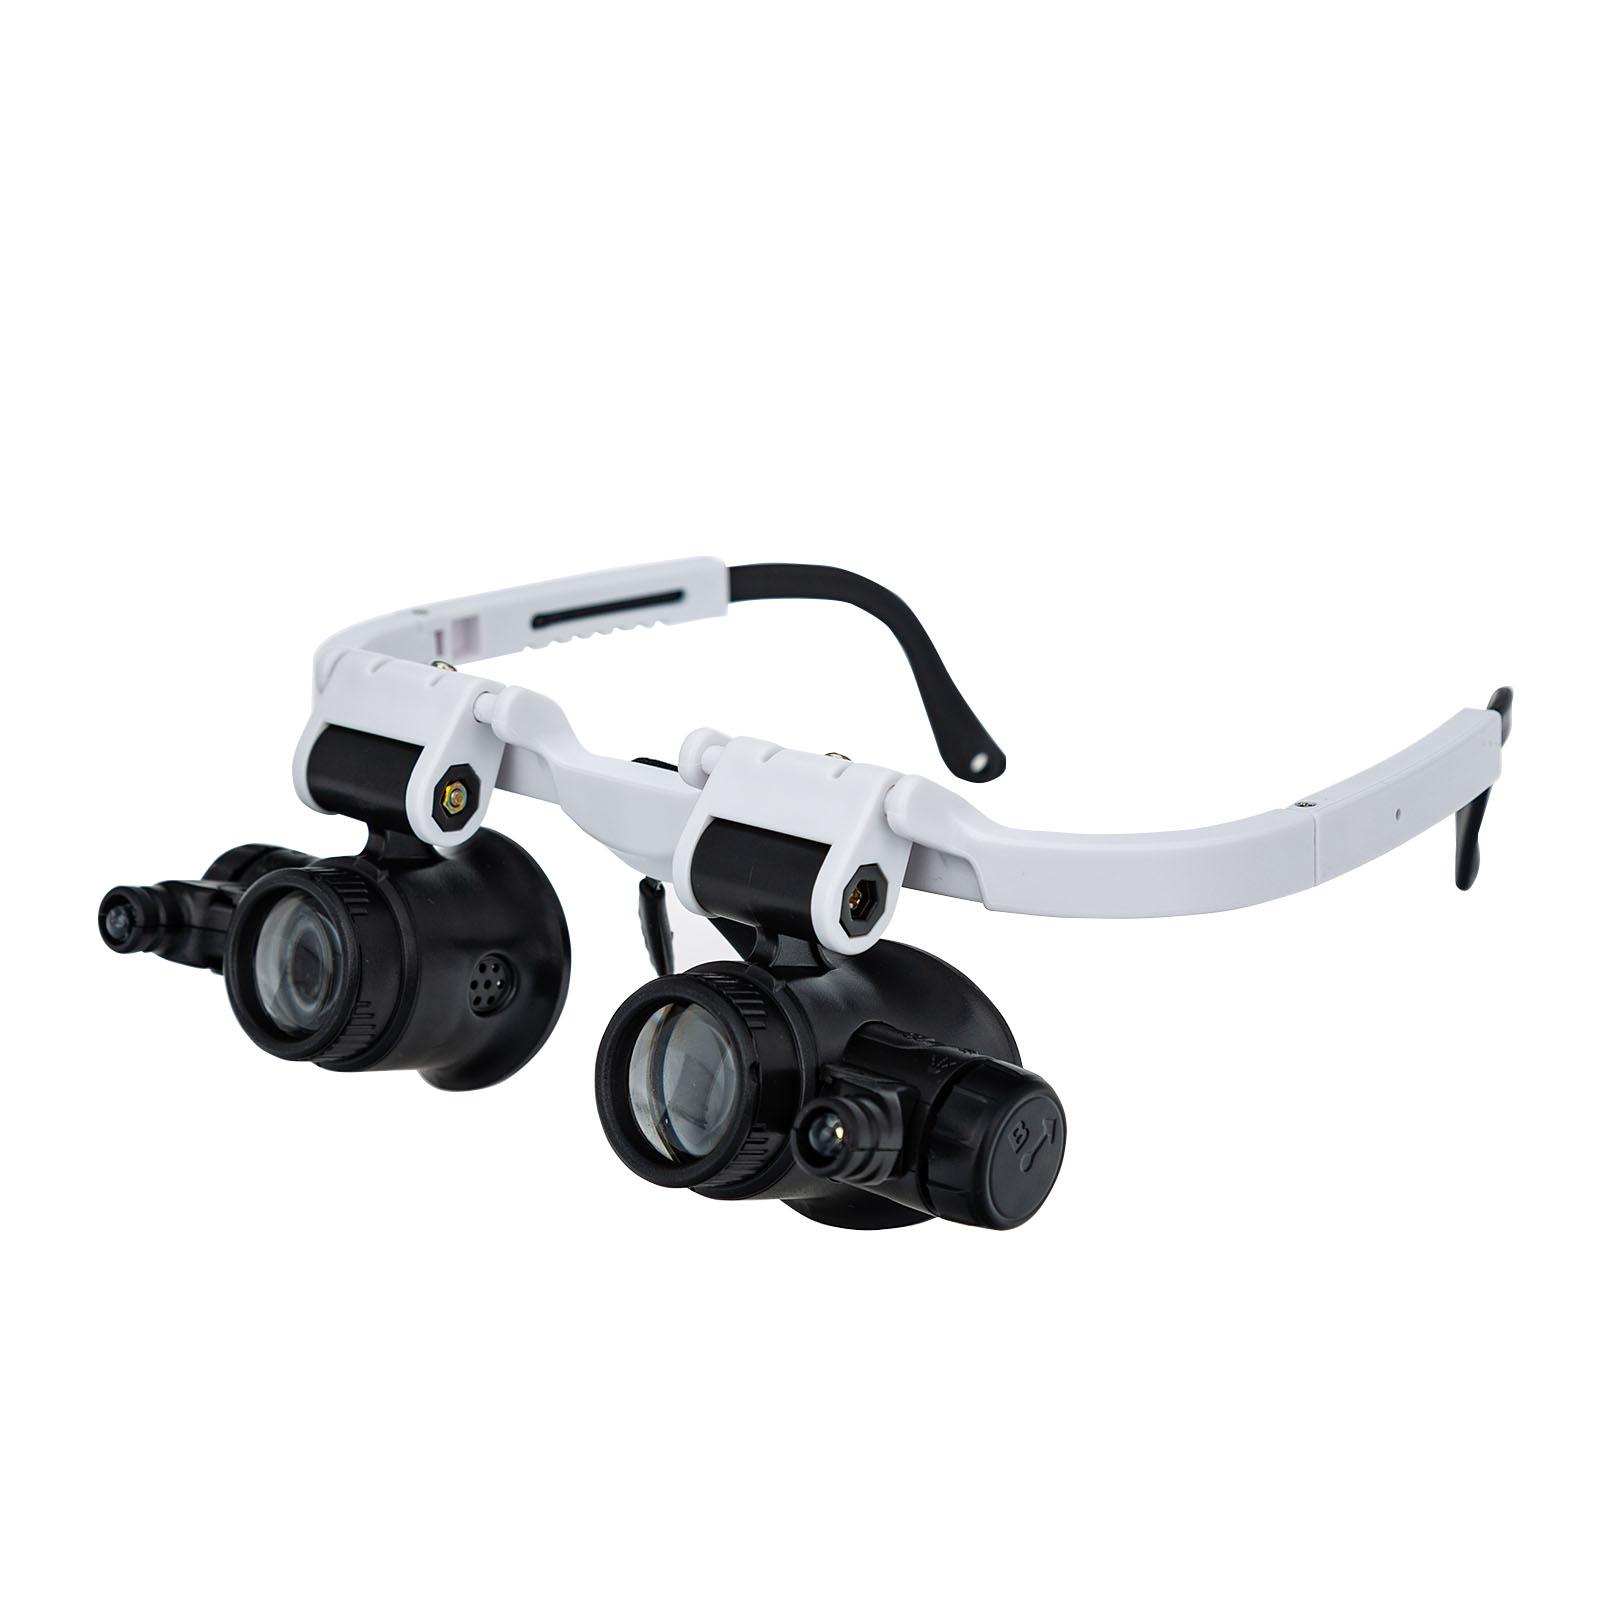 Loupe Magnifier Glasses Head Mount with LED Light Adjustable Glasses Bracket Watch Repair Magnifier for Mechanical